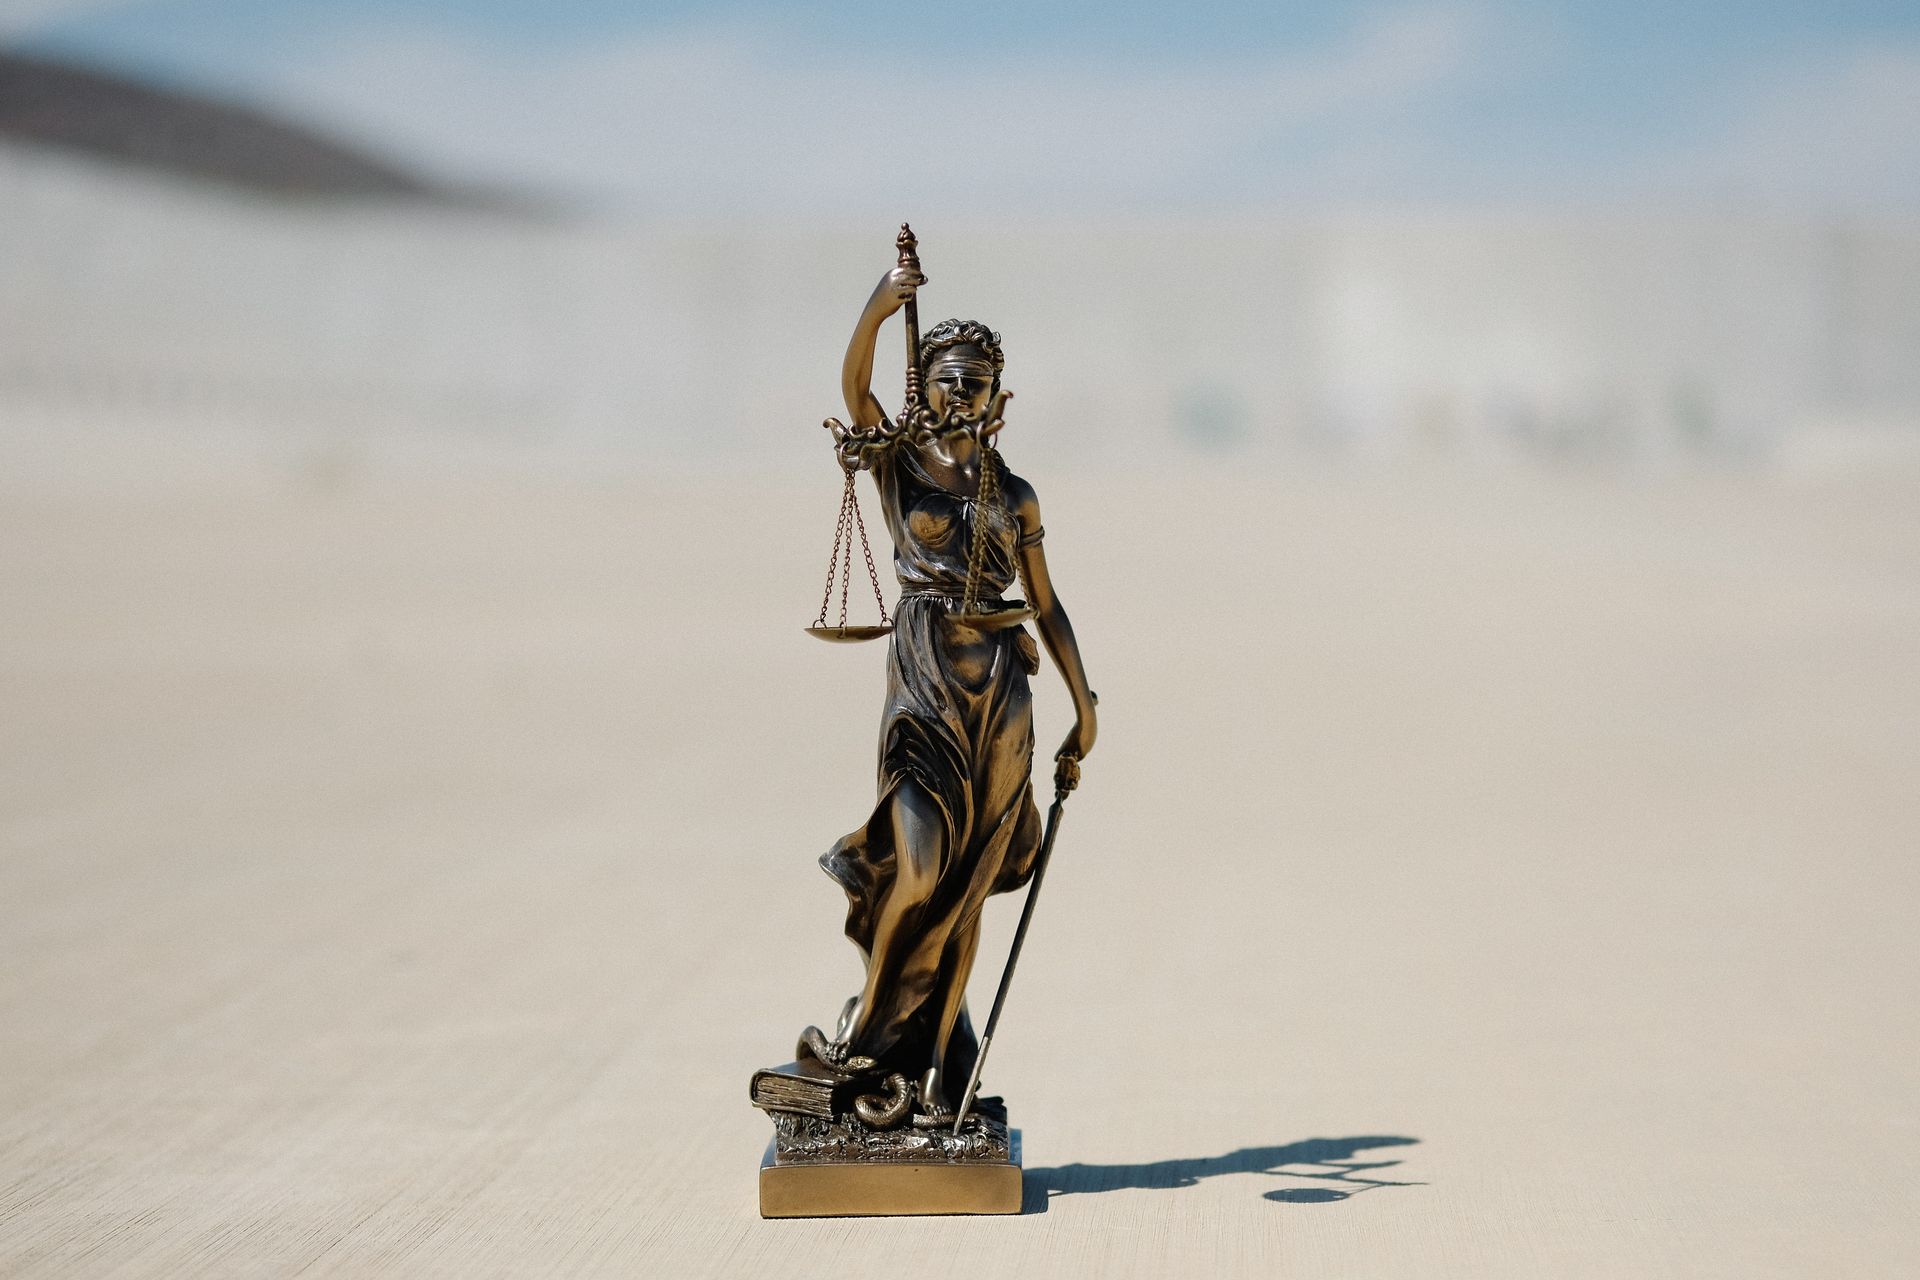 A statue of justice is standing in the sand holding scales of justice.